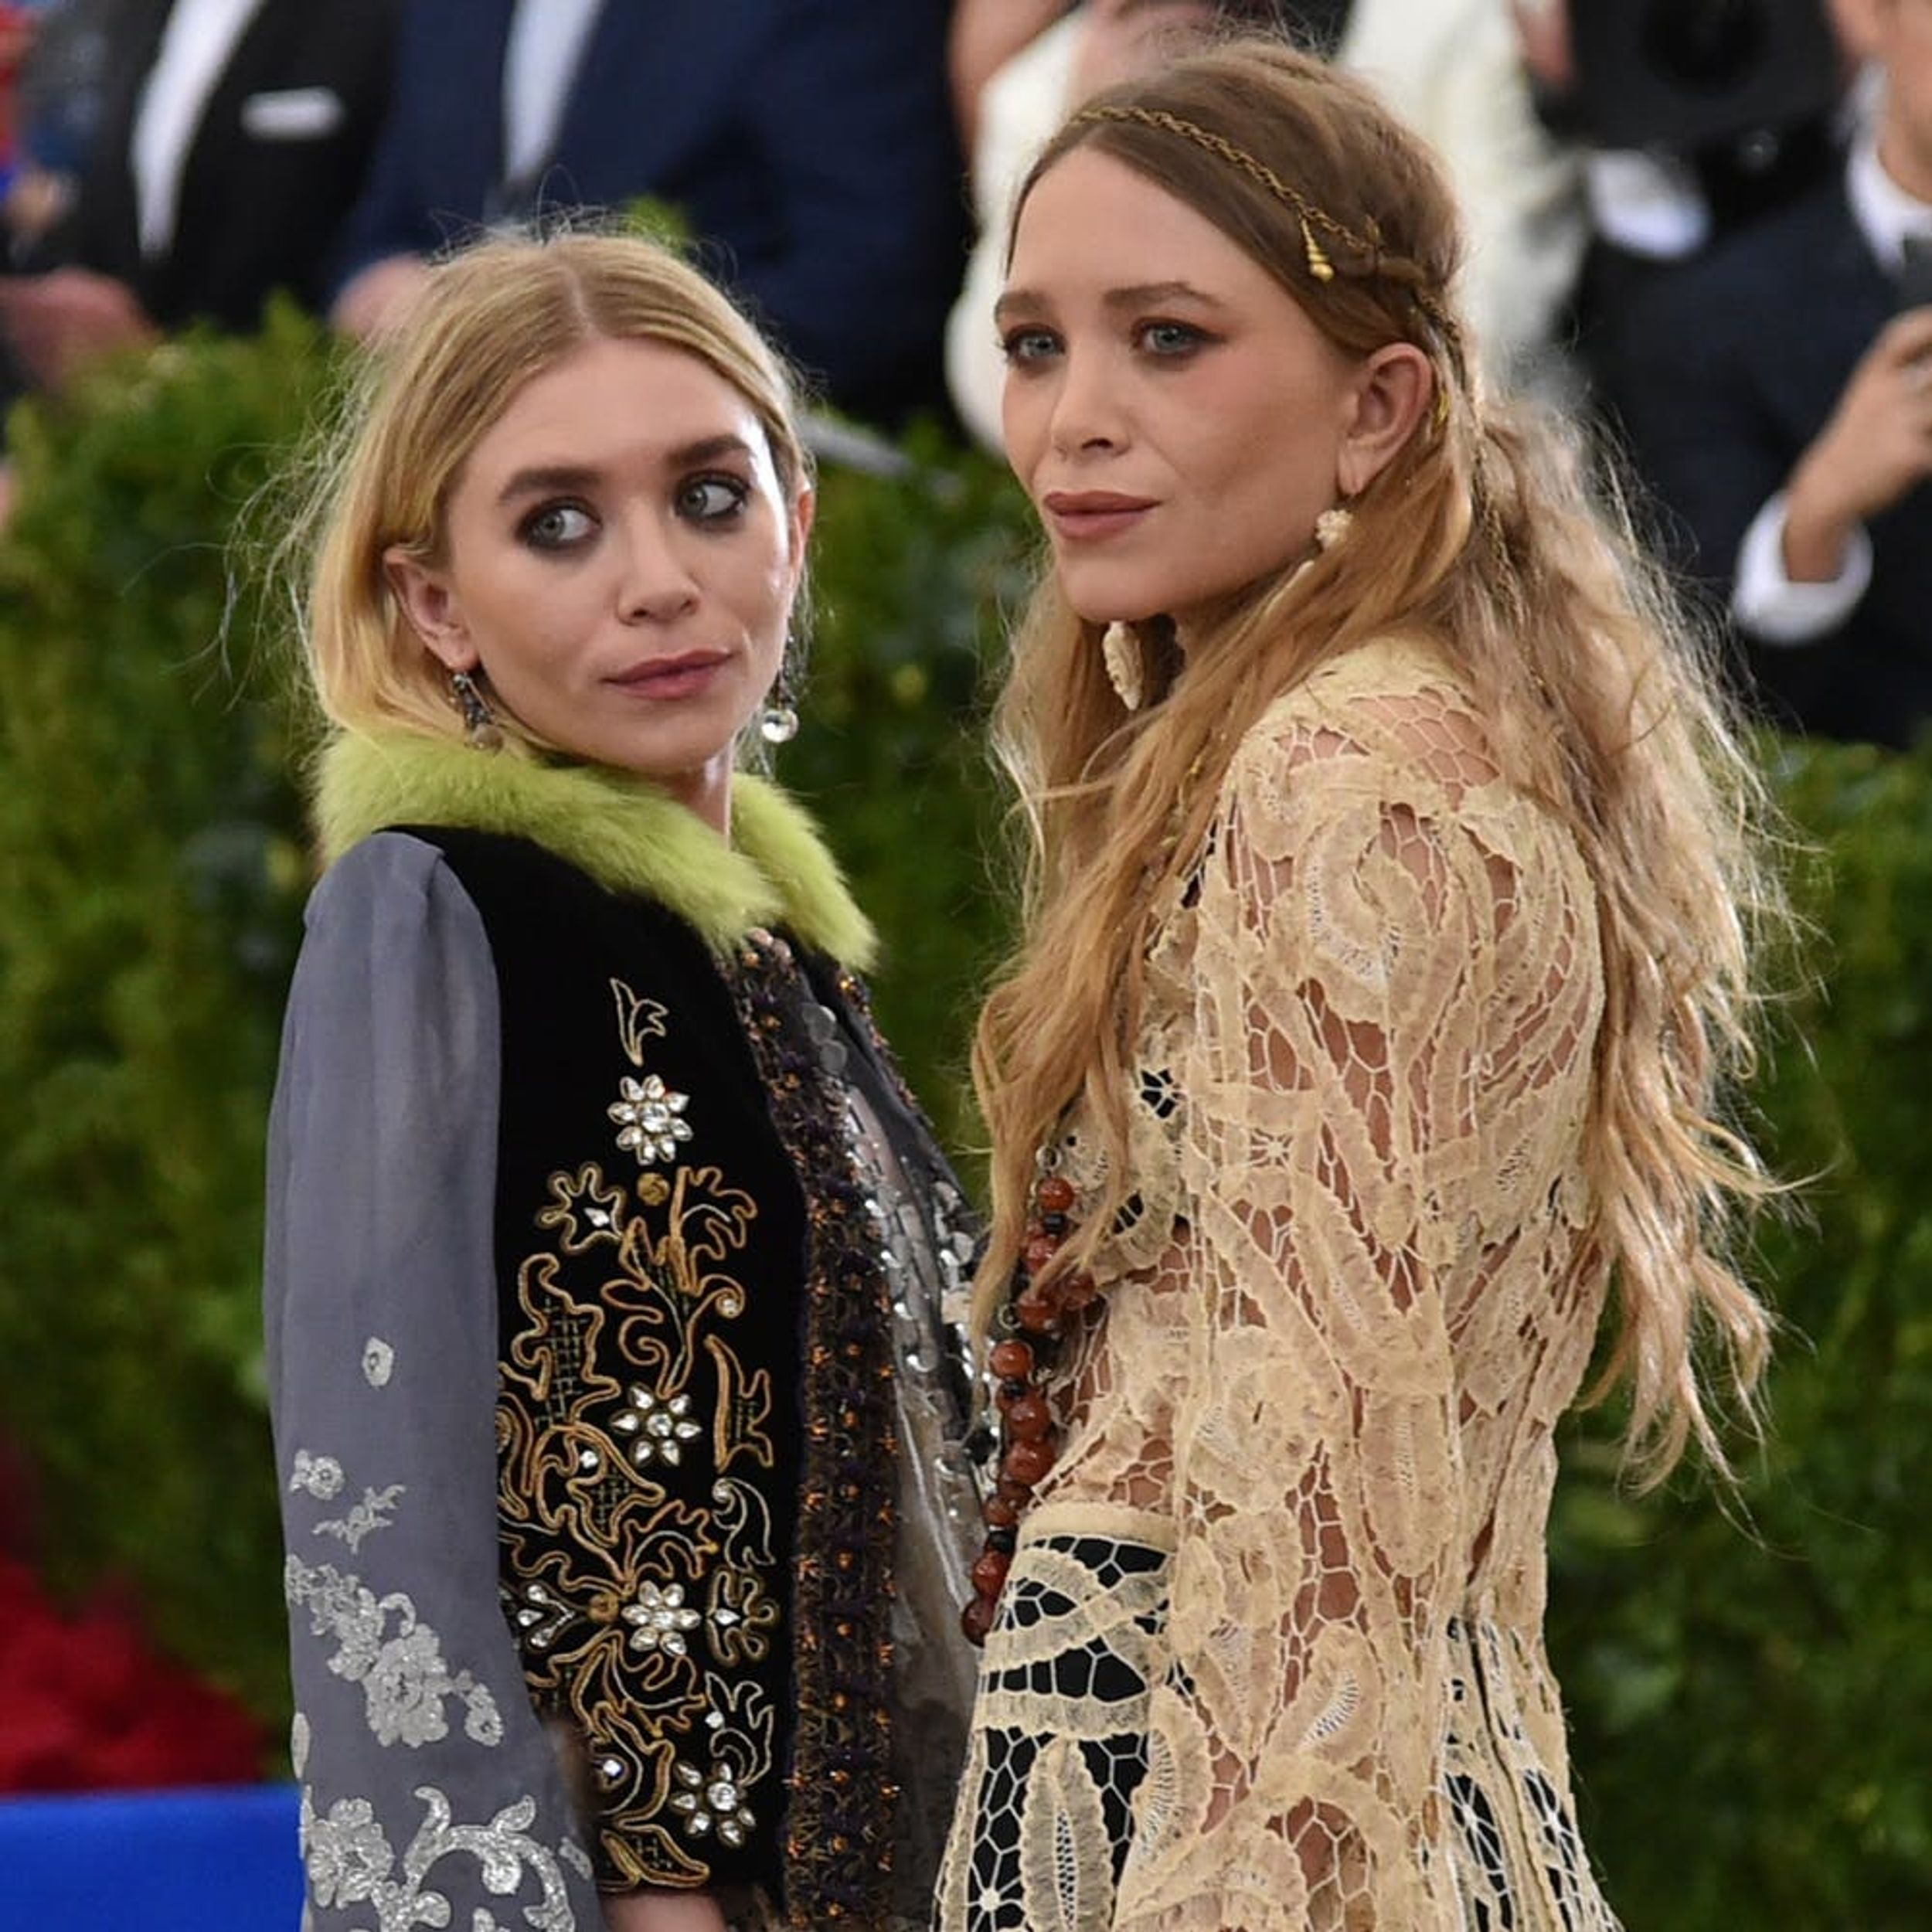 “Fuller House” Creator Says He Stopped Asking Mary-Kate and Ashley Olsen to Make a Cameo